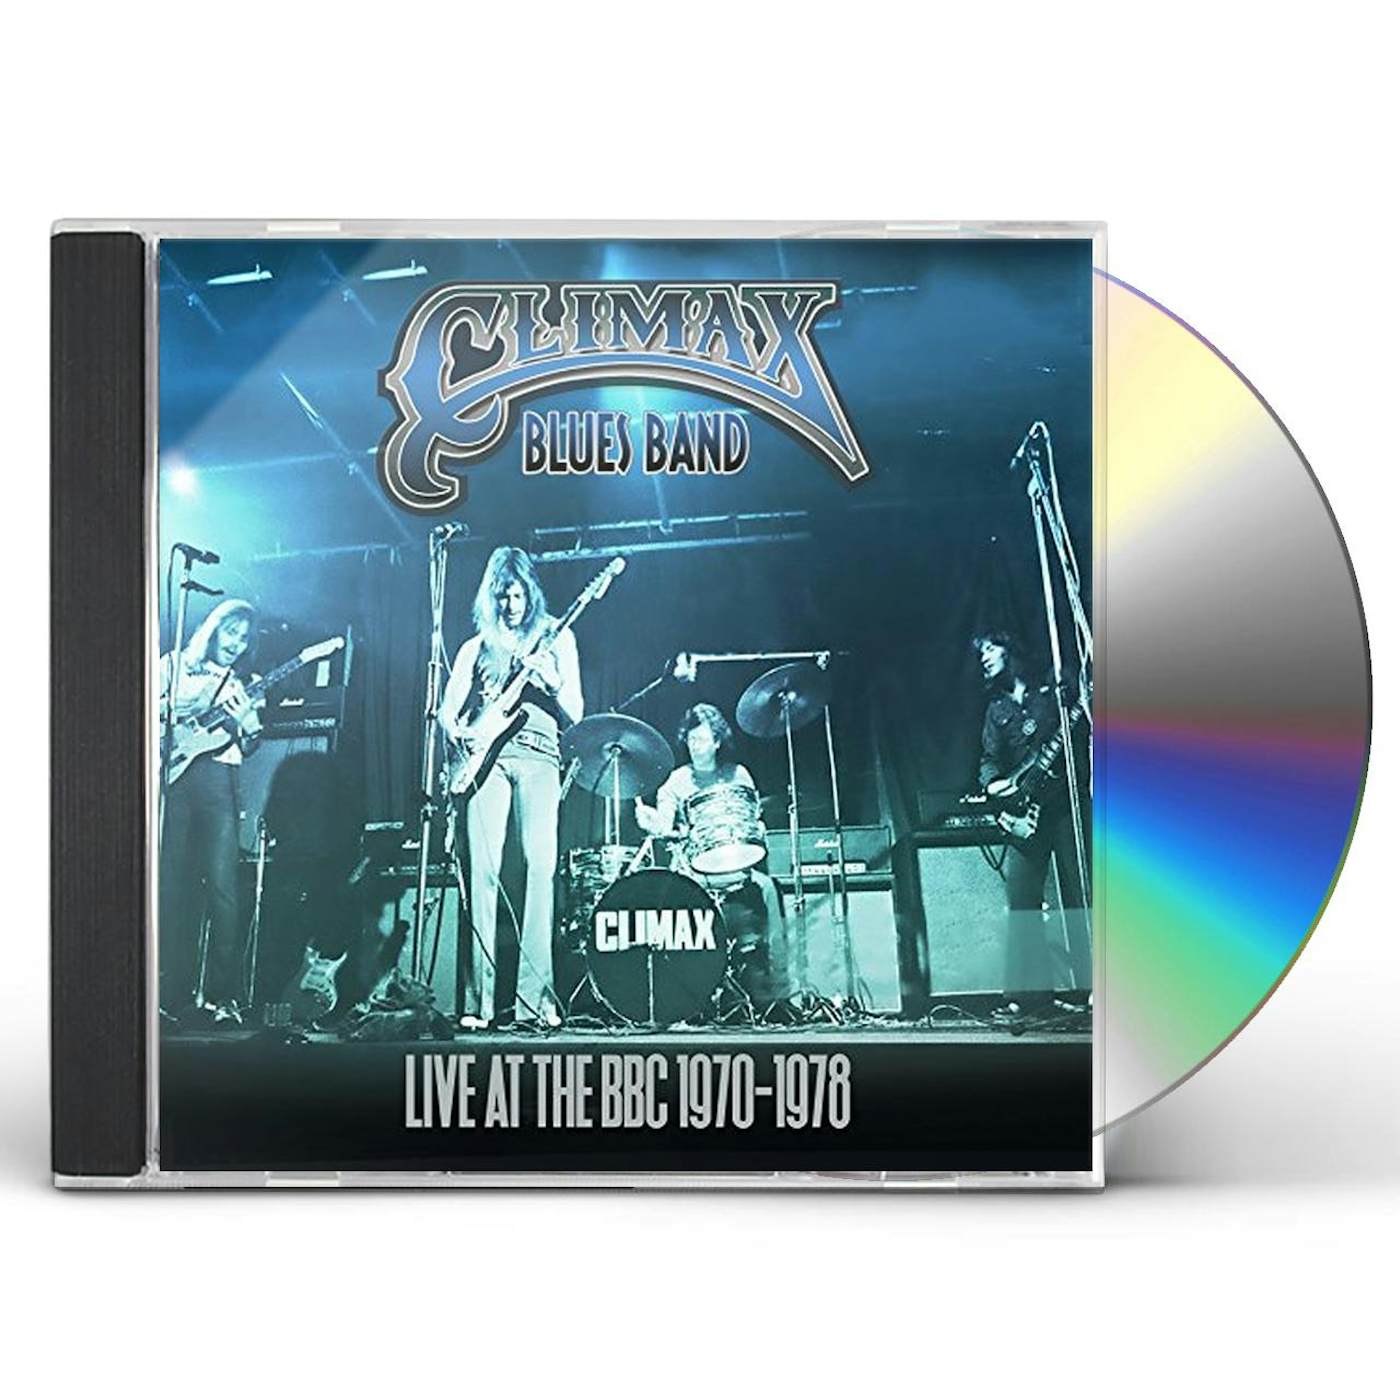 Climax Blues Band LIVE AT THE BBC 1970-1978 CD